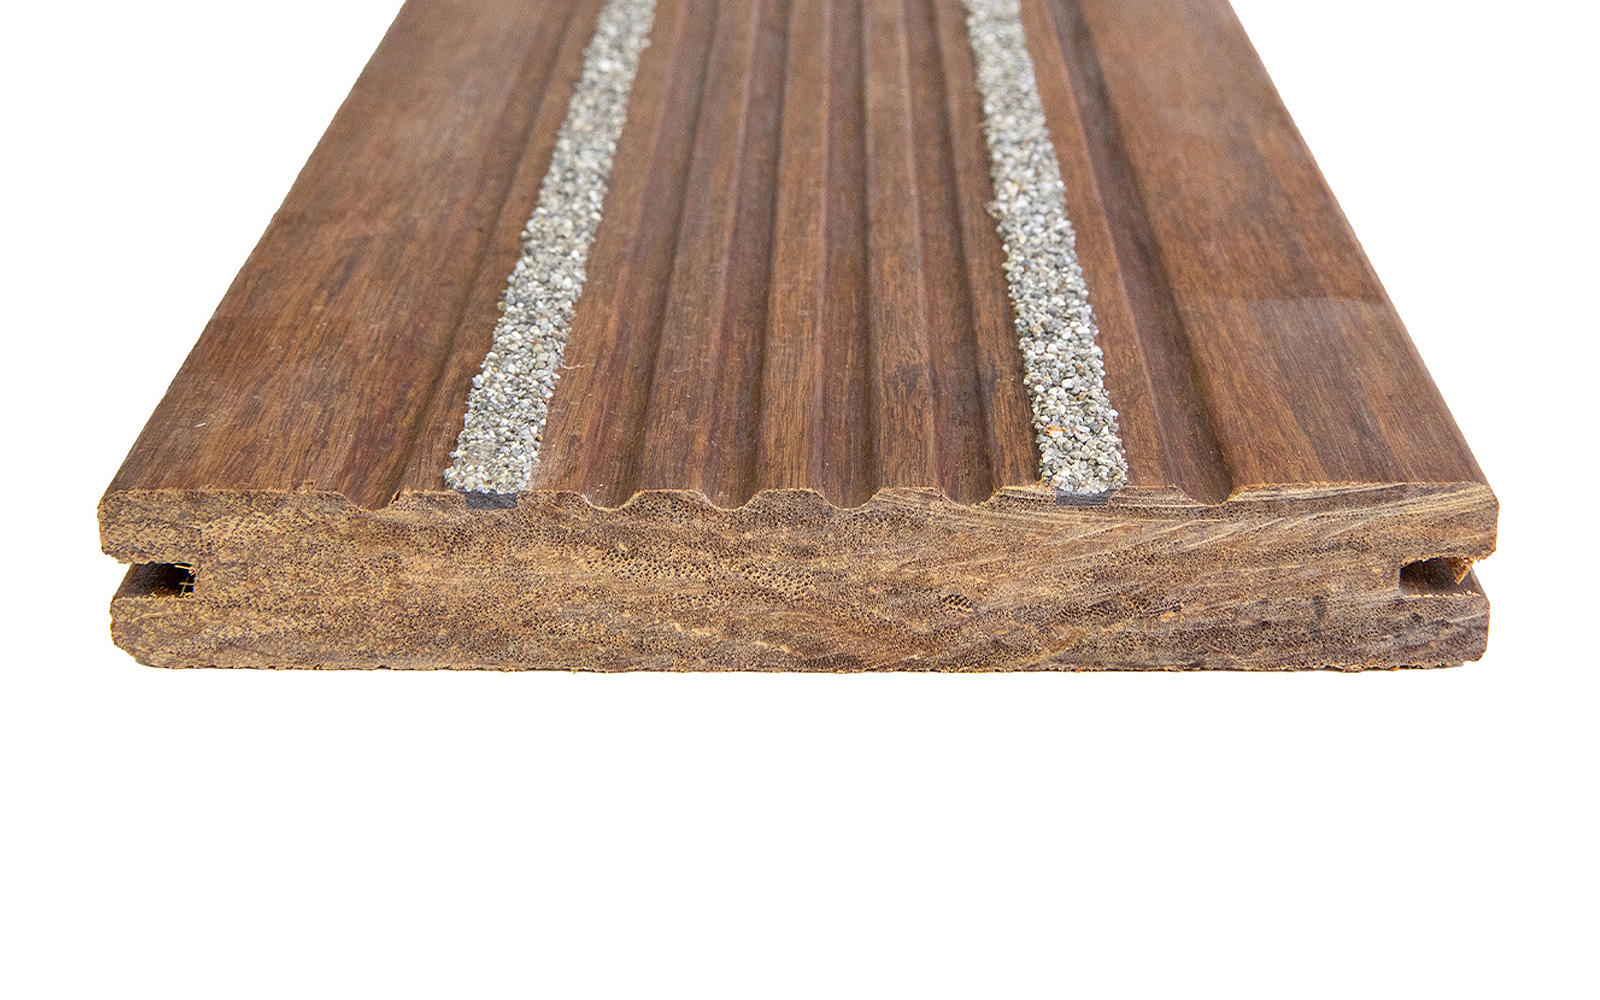 MOSO® Bamboo N-durance® Decking with Gripsure